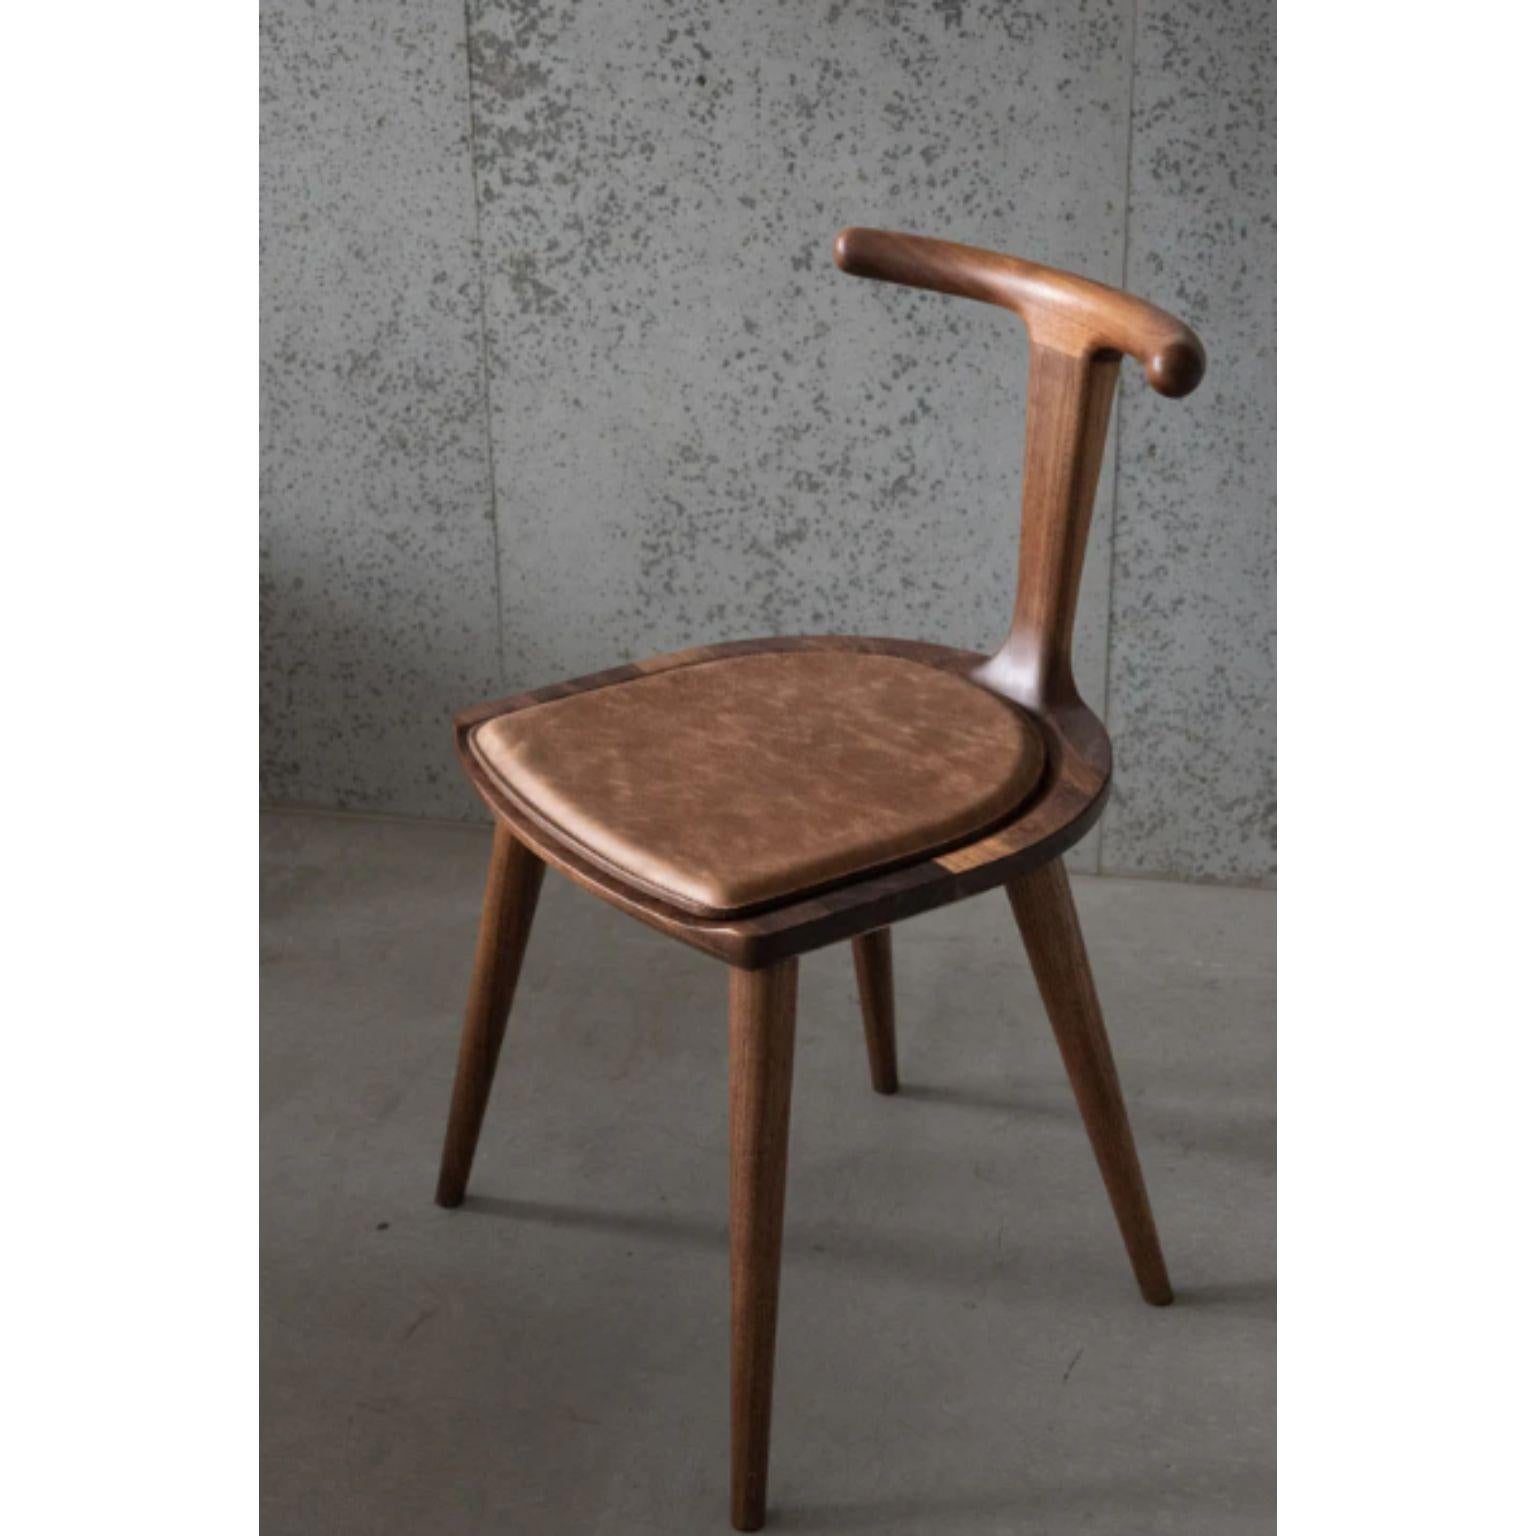 Walnut Oxbend Chair with Leather Seat Pad by Fernweh Woodworking
Dimensions: Seat: W 17” x D 17” x H 16.5” 
Backrest: 29.5” high at center, 30” high on ends
Materials: Walnut, Leather

Wood options: walnut, charcoal ash, white ash.
Upholstery